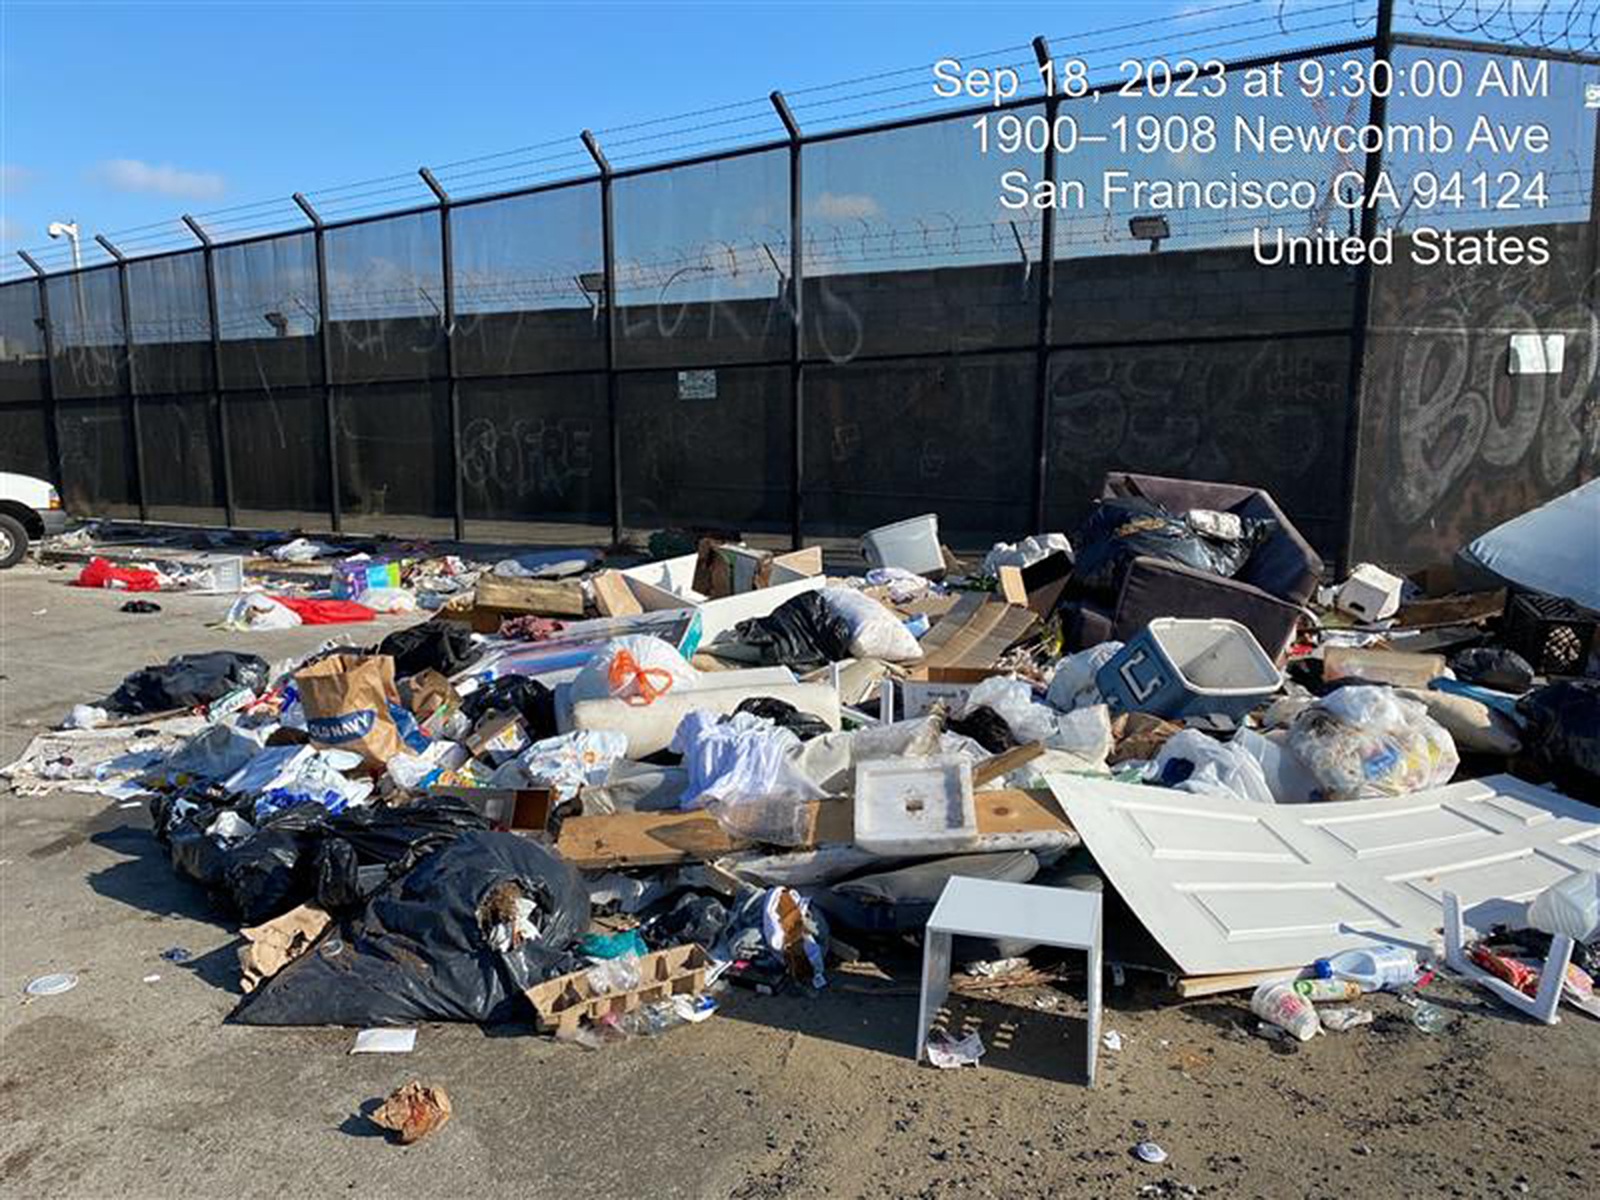 A large, messy pile of trash strewn across an urban lot with graffiti-covered walls.